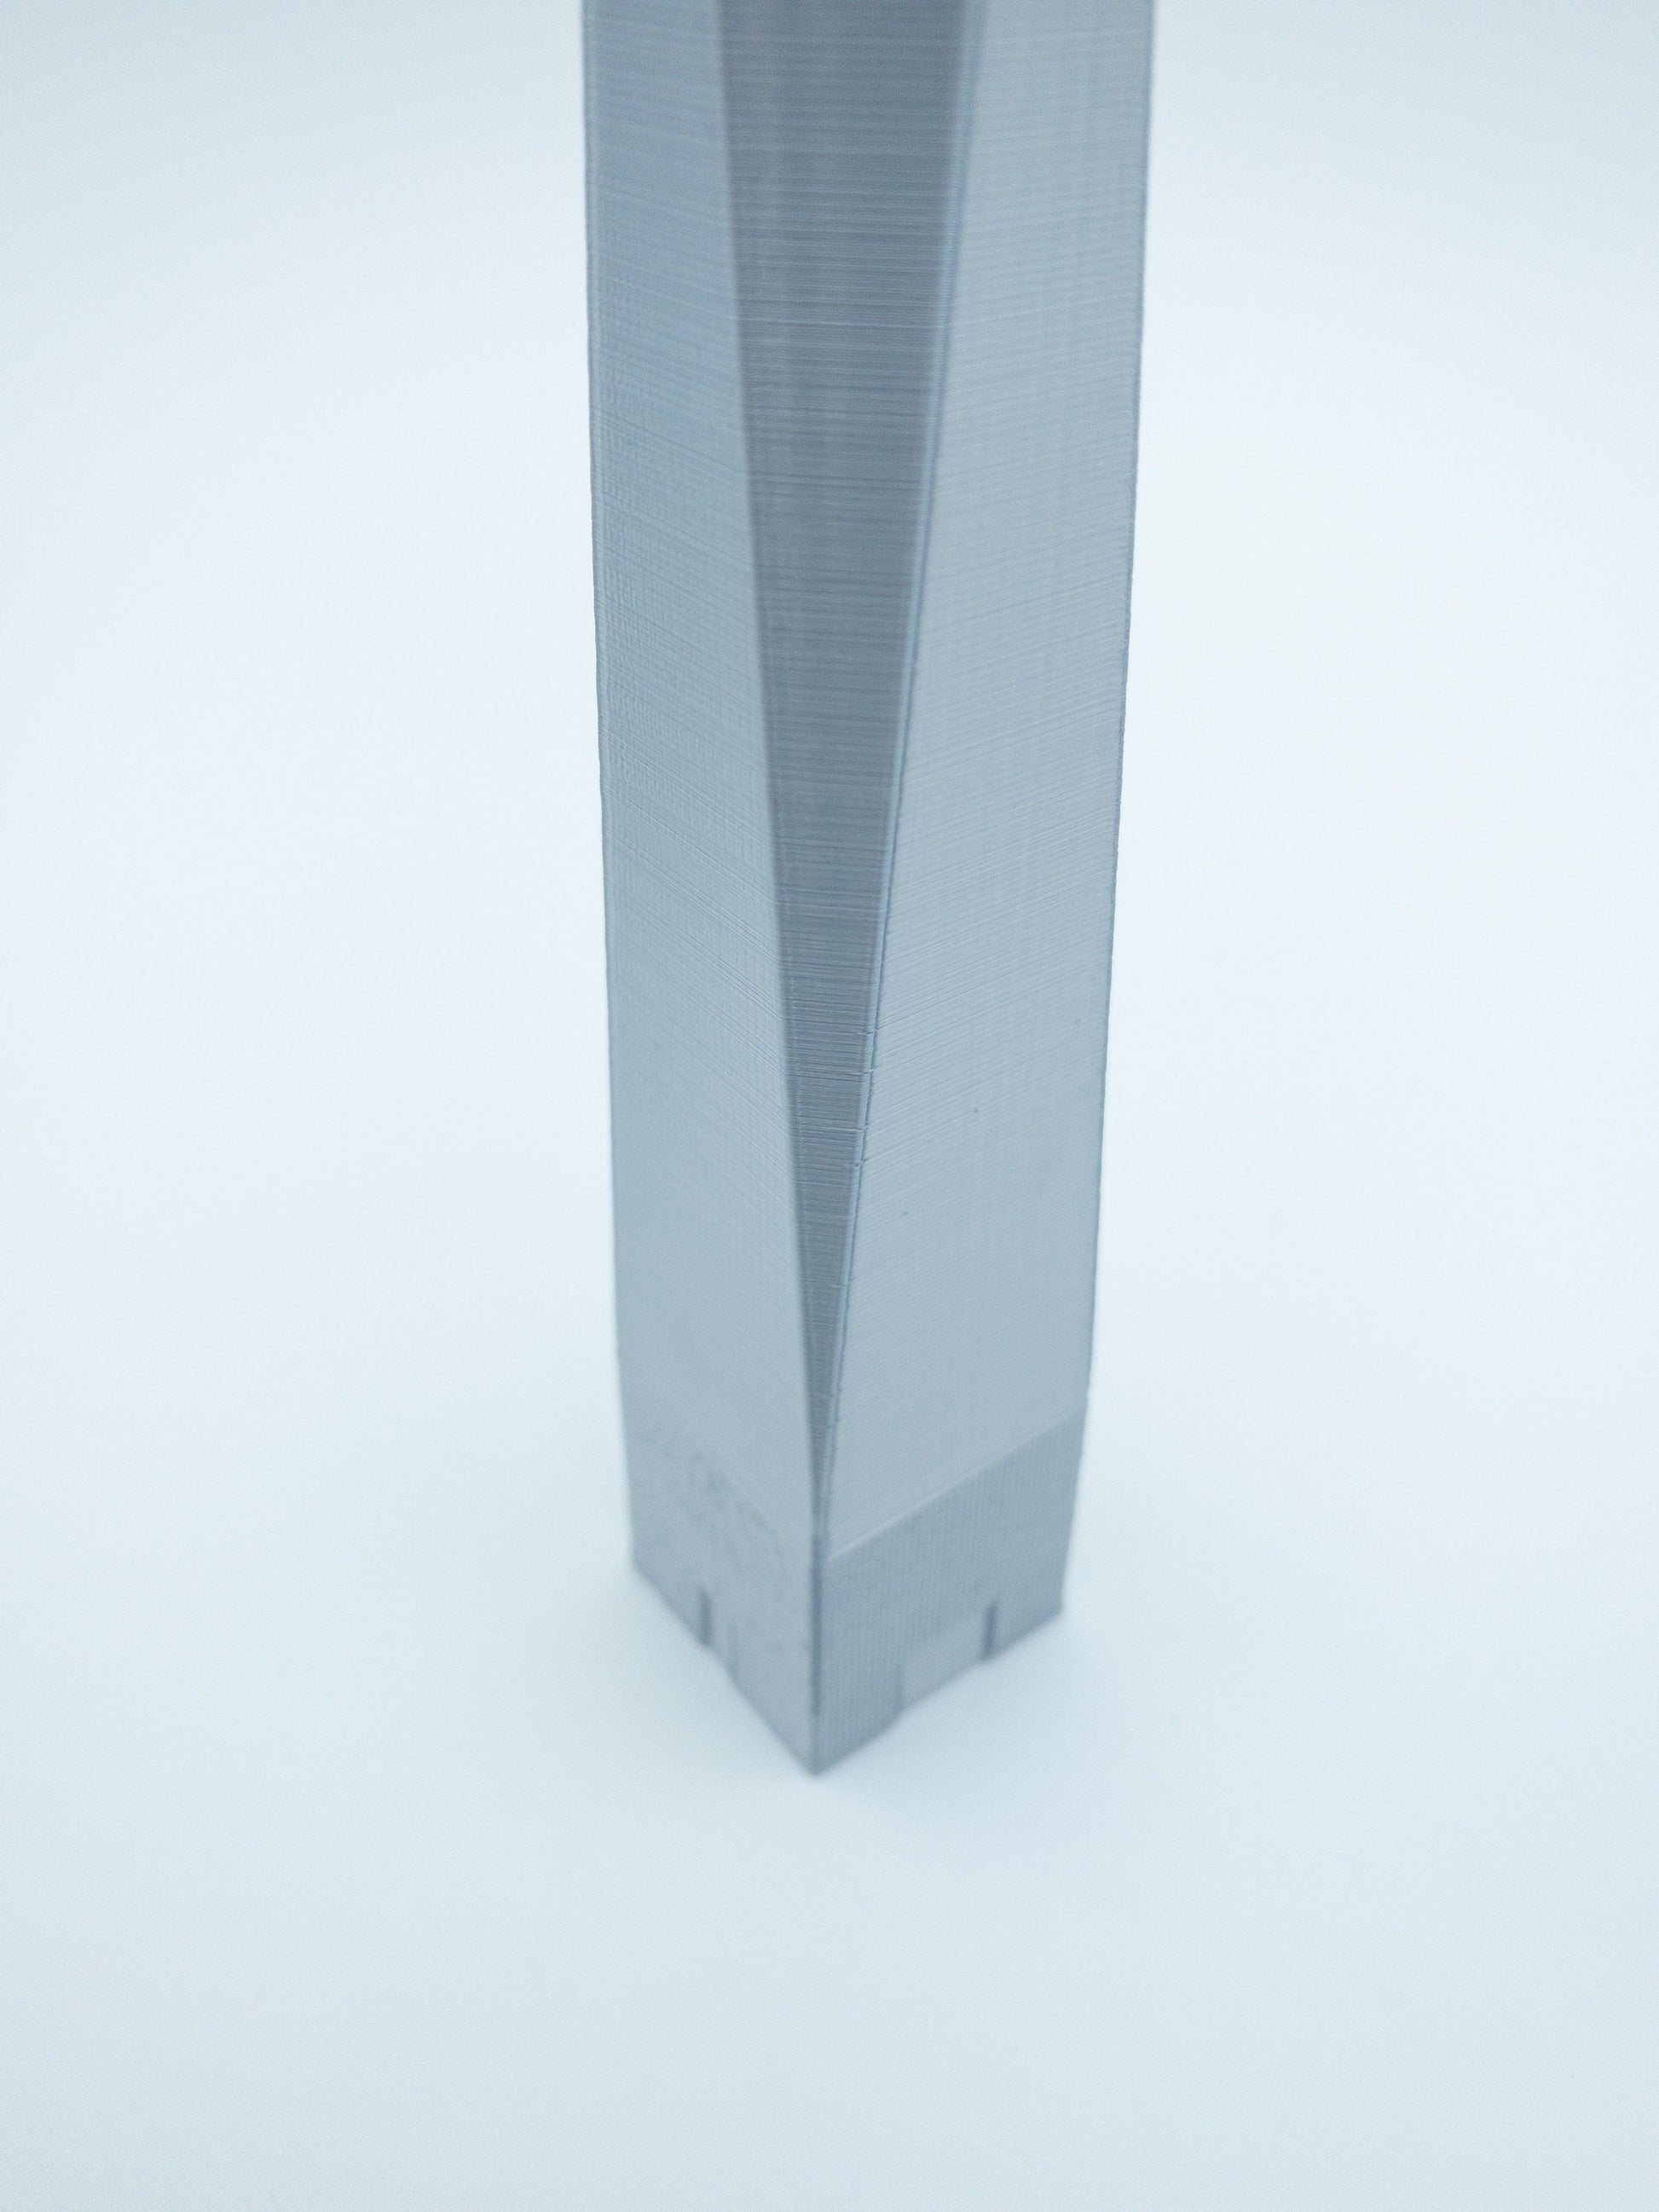 One World Trade Center Model- 3D Printed